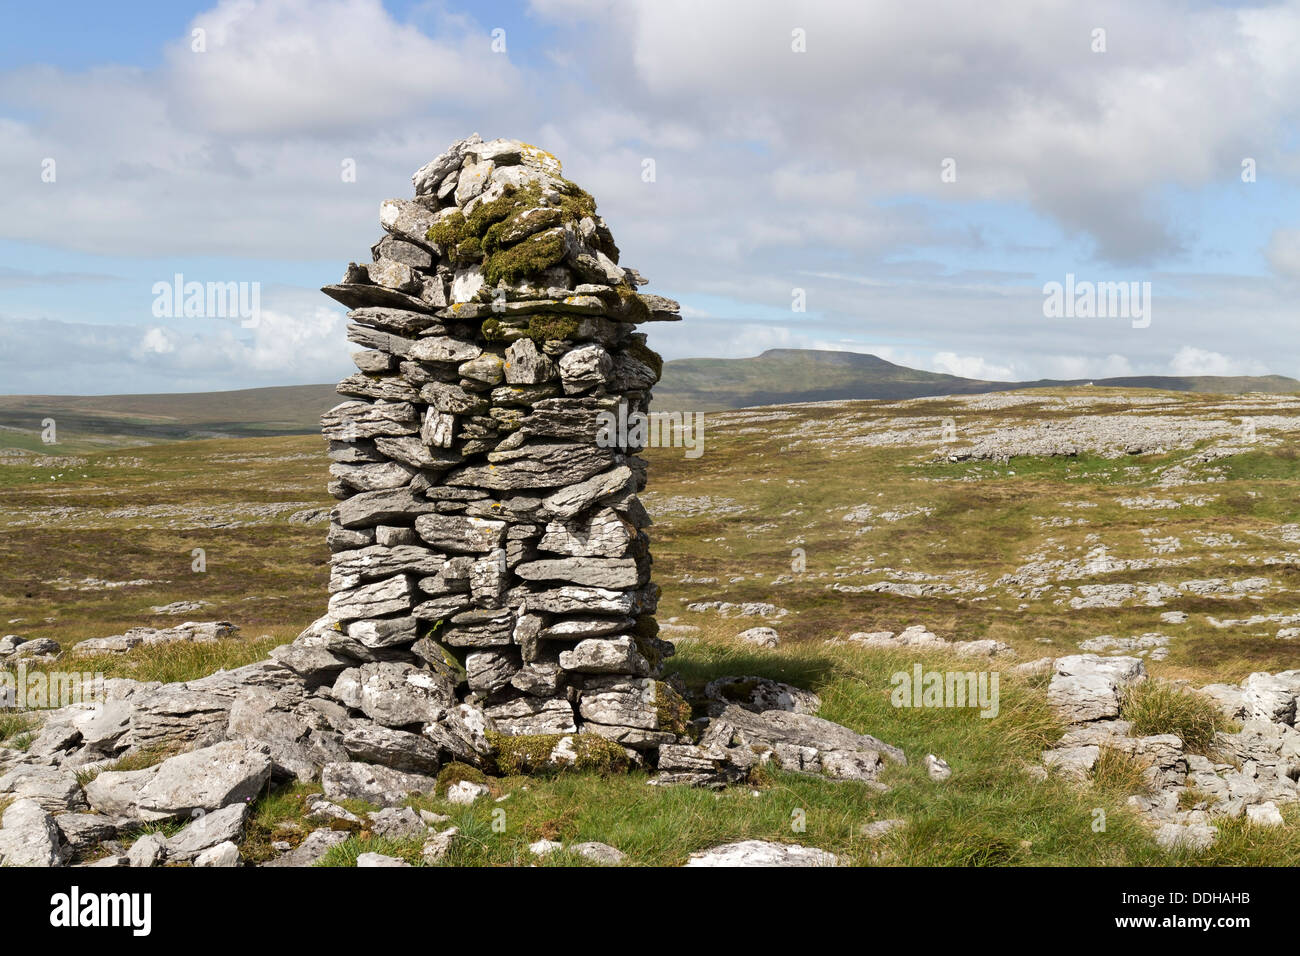 Cairn on Moughton Fell with the Mountain of Ingleborough in the Background Yorkshire Dales UK Stock Photo